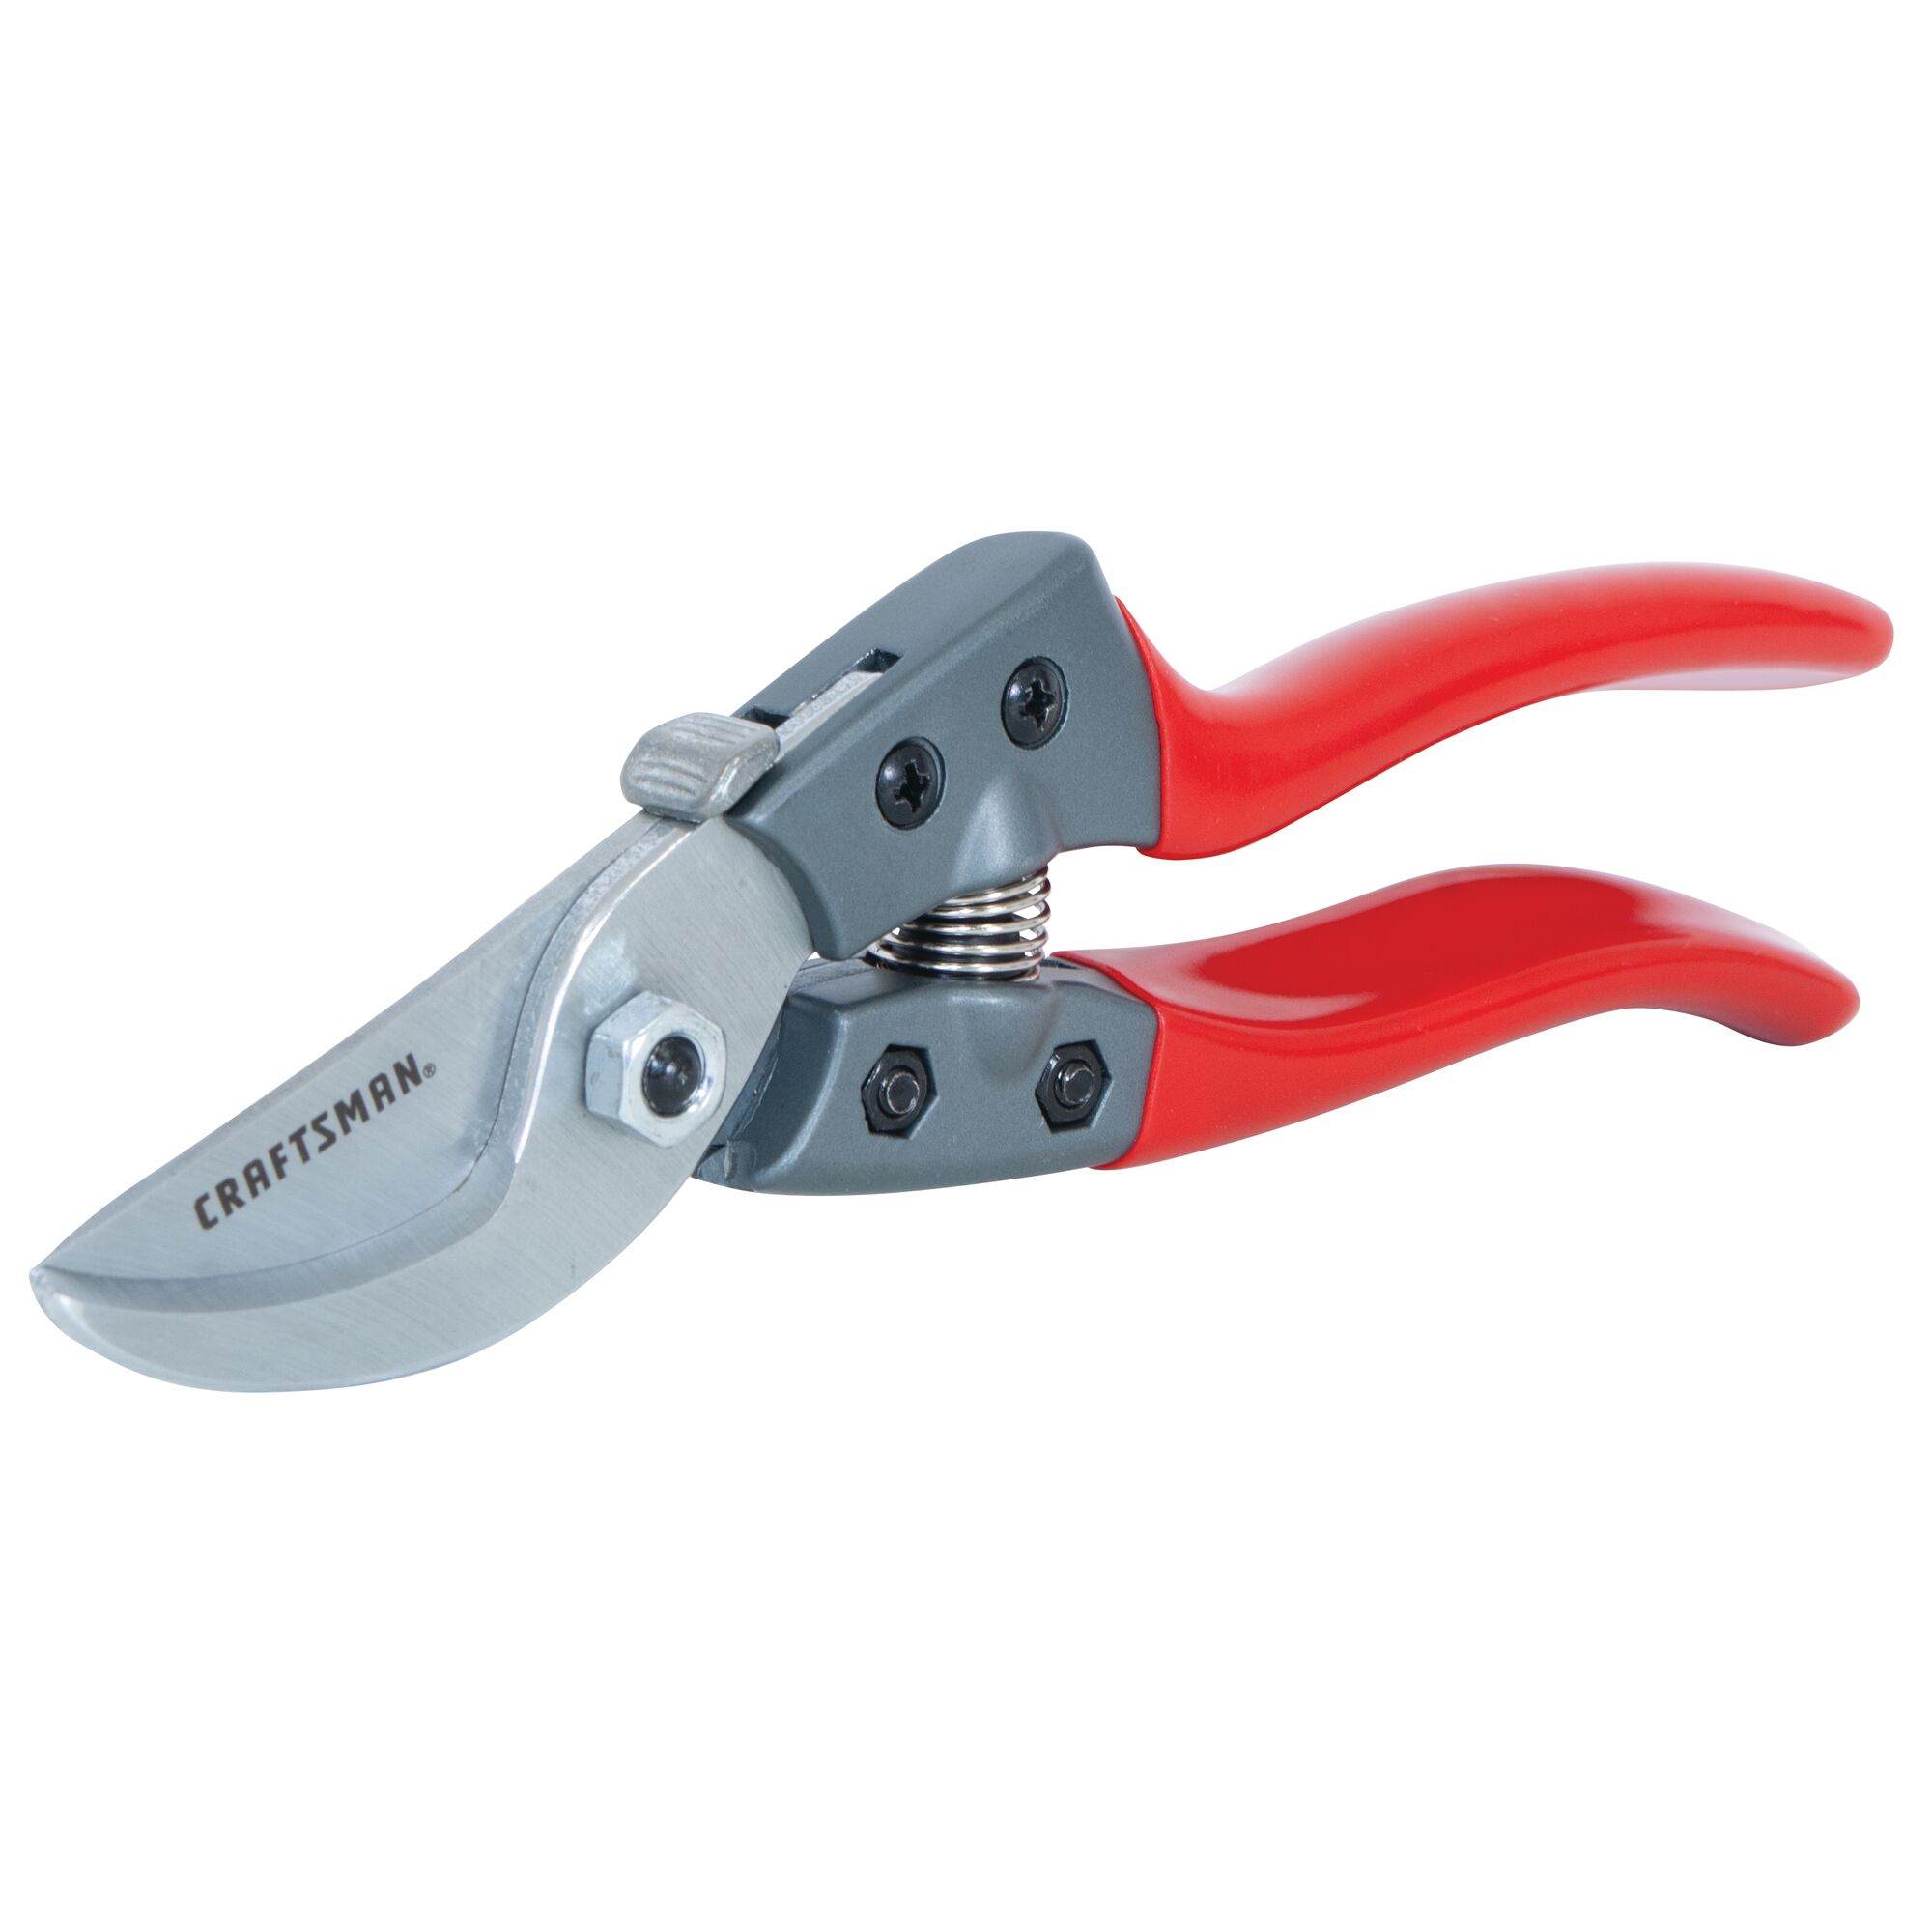 Right profile of aluminum bypass hand pruner.